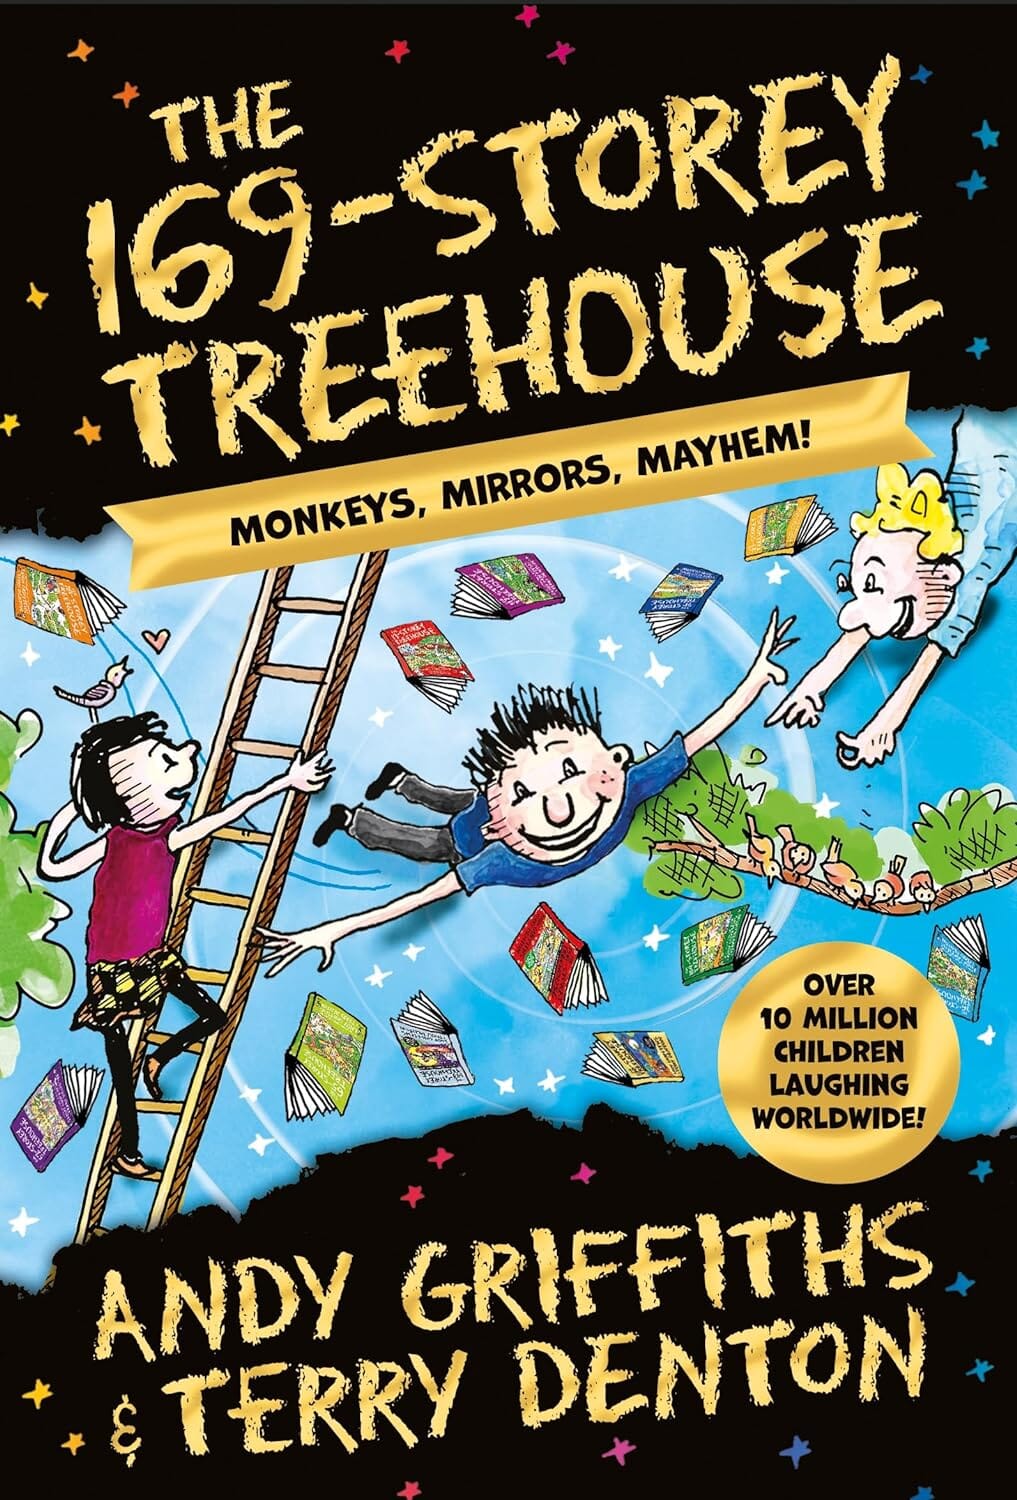 The Treehouse Series Books